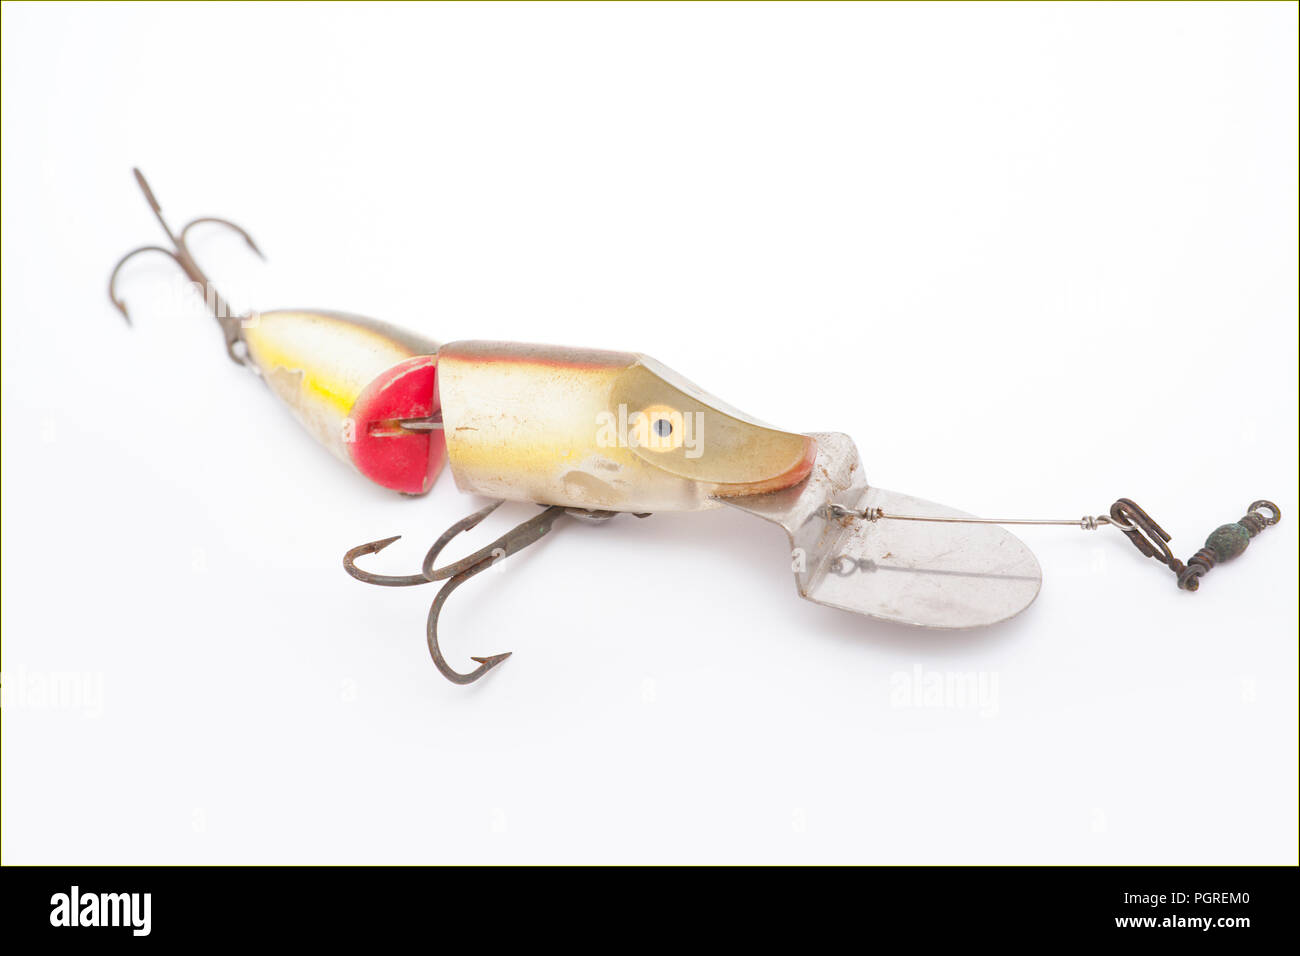 An old Heddon River Runt Spook fishing lure, or plug, designed for catching predatory fish. From a collection of vintage and modern fishing tackle. No Stock Photo